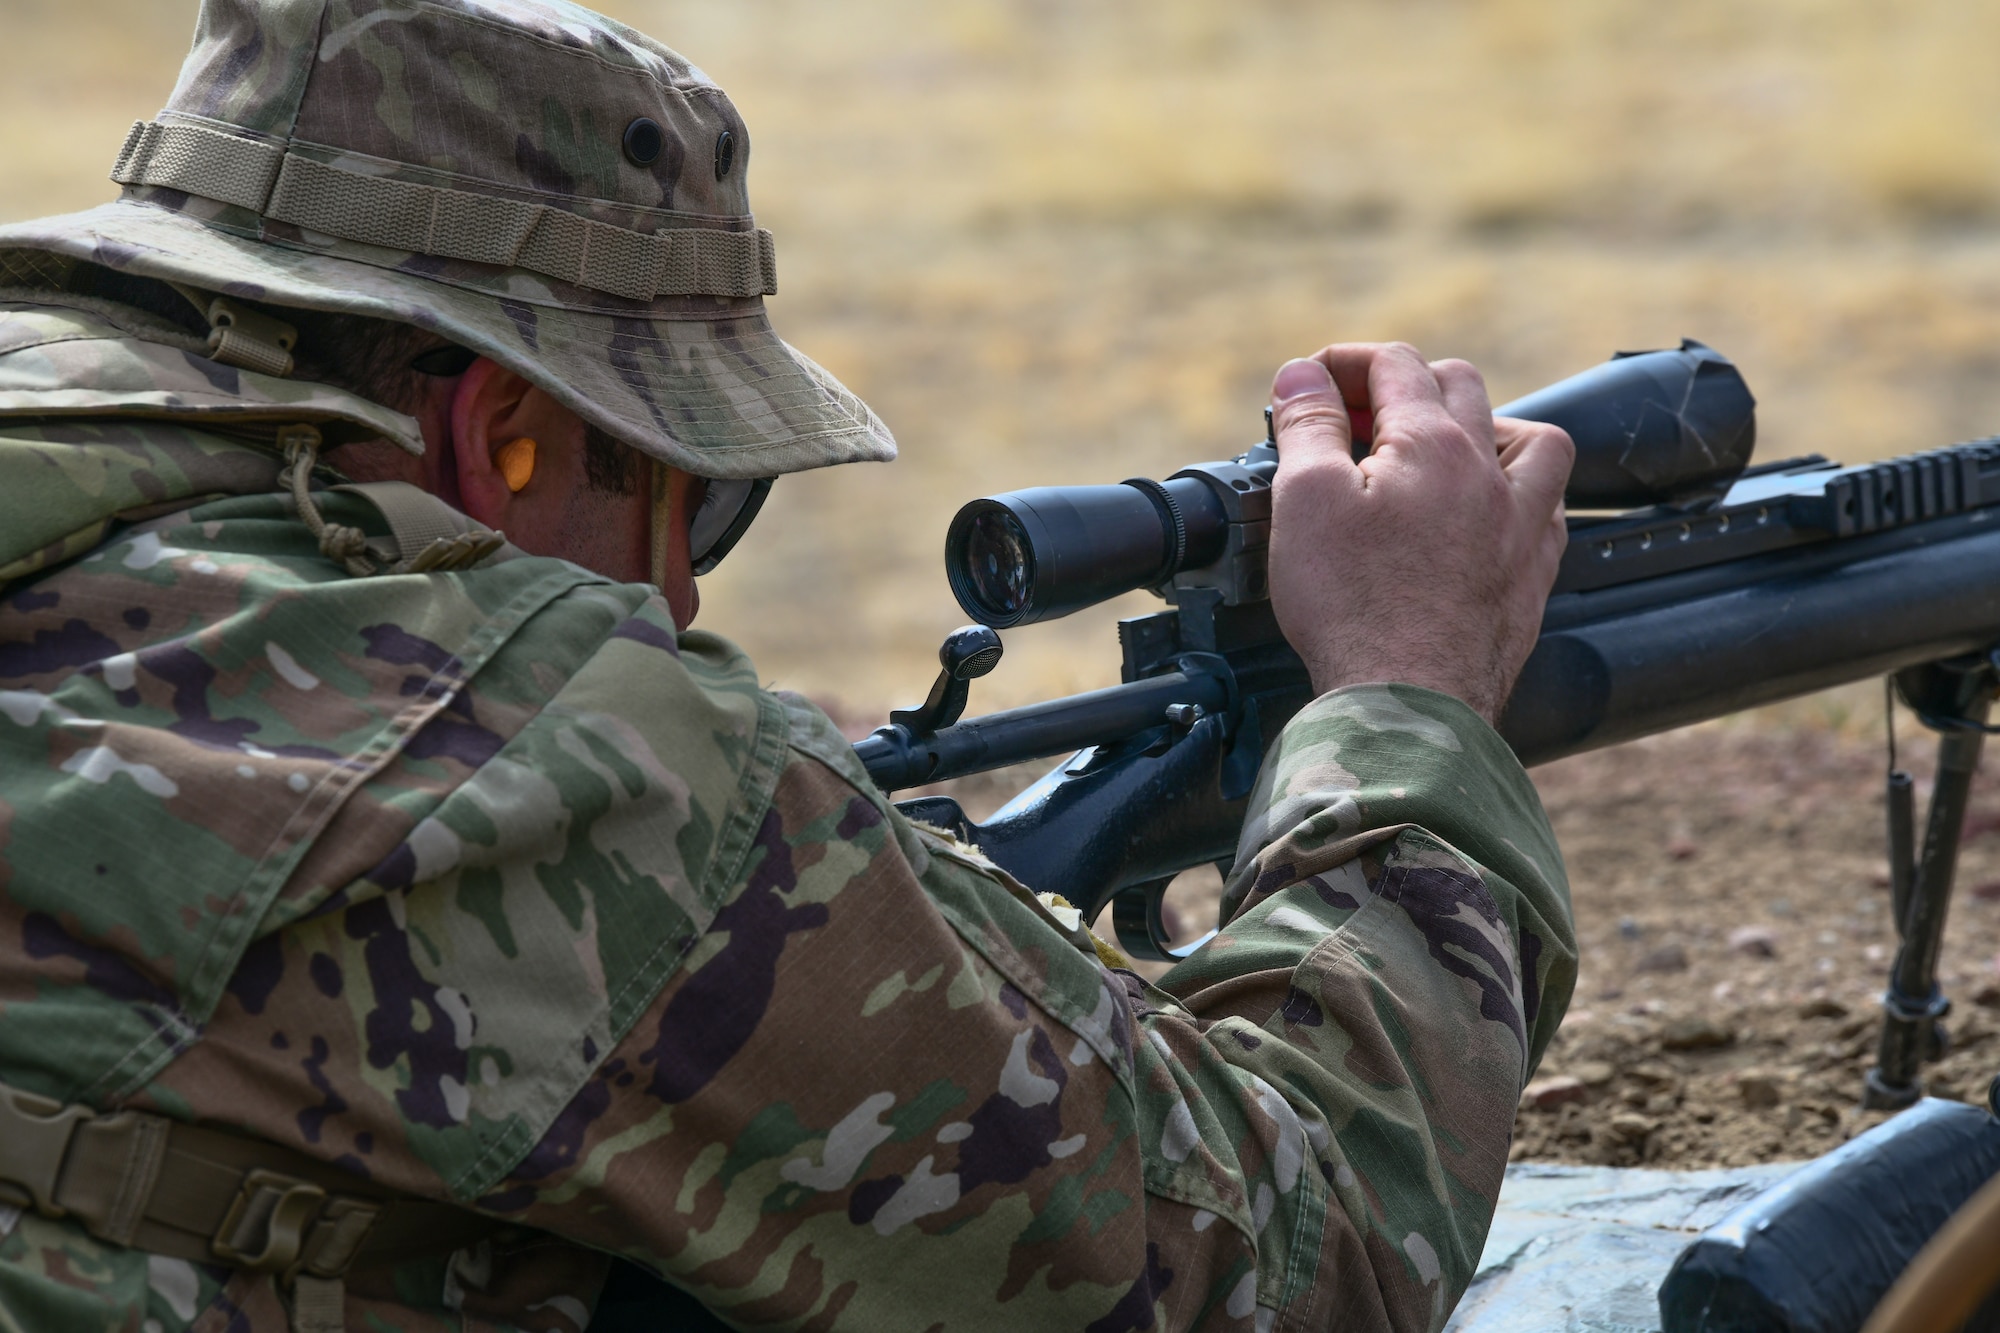 An Airmen adjusts his weapons scope